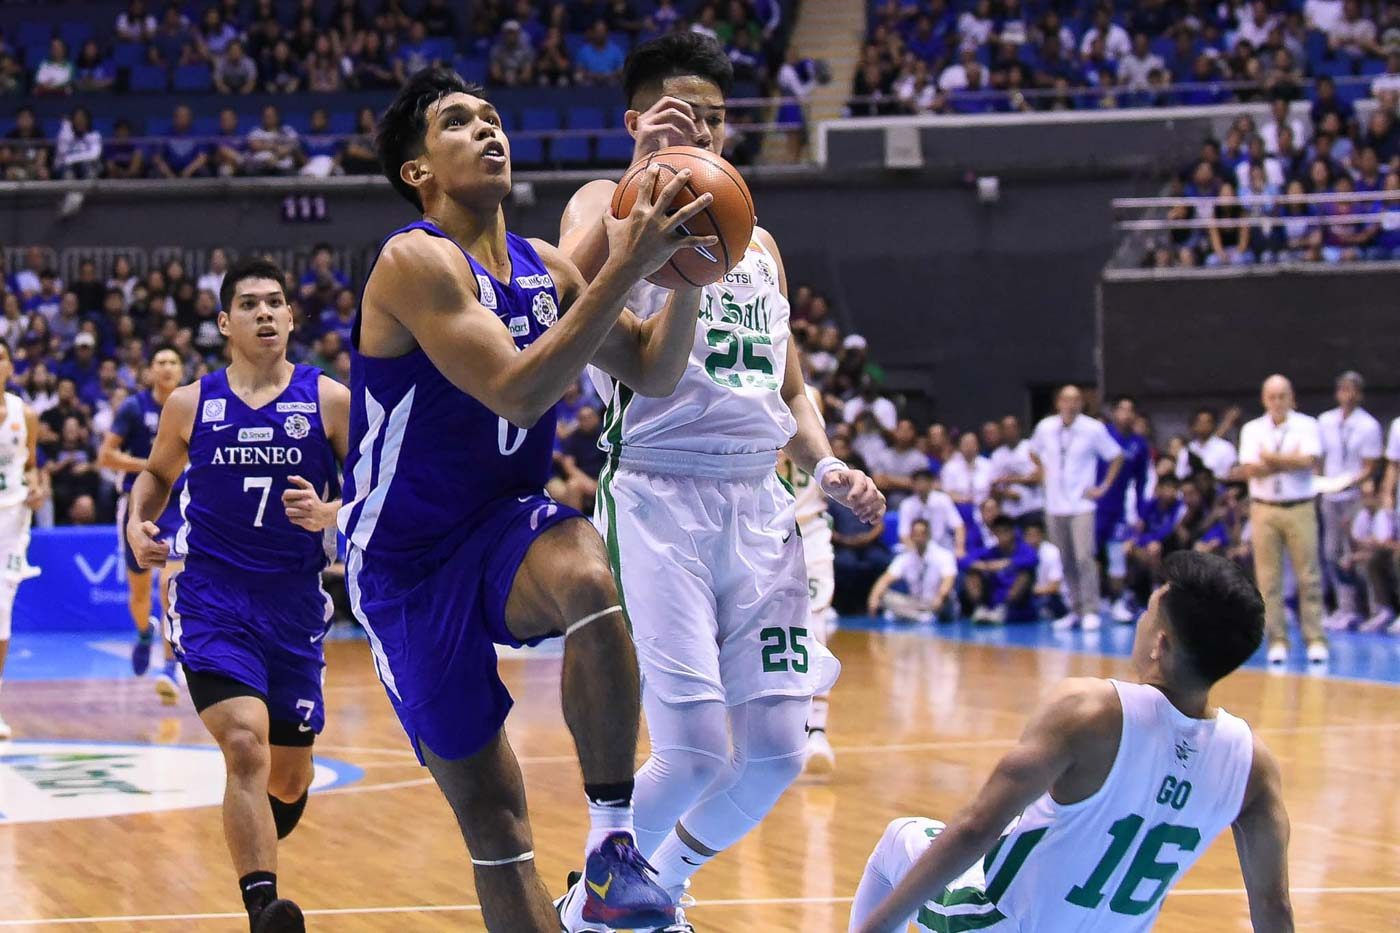 ‘Next man up’ mentality props up Ateneo